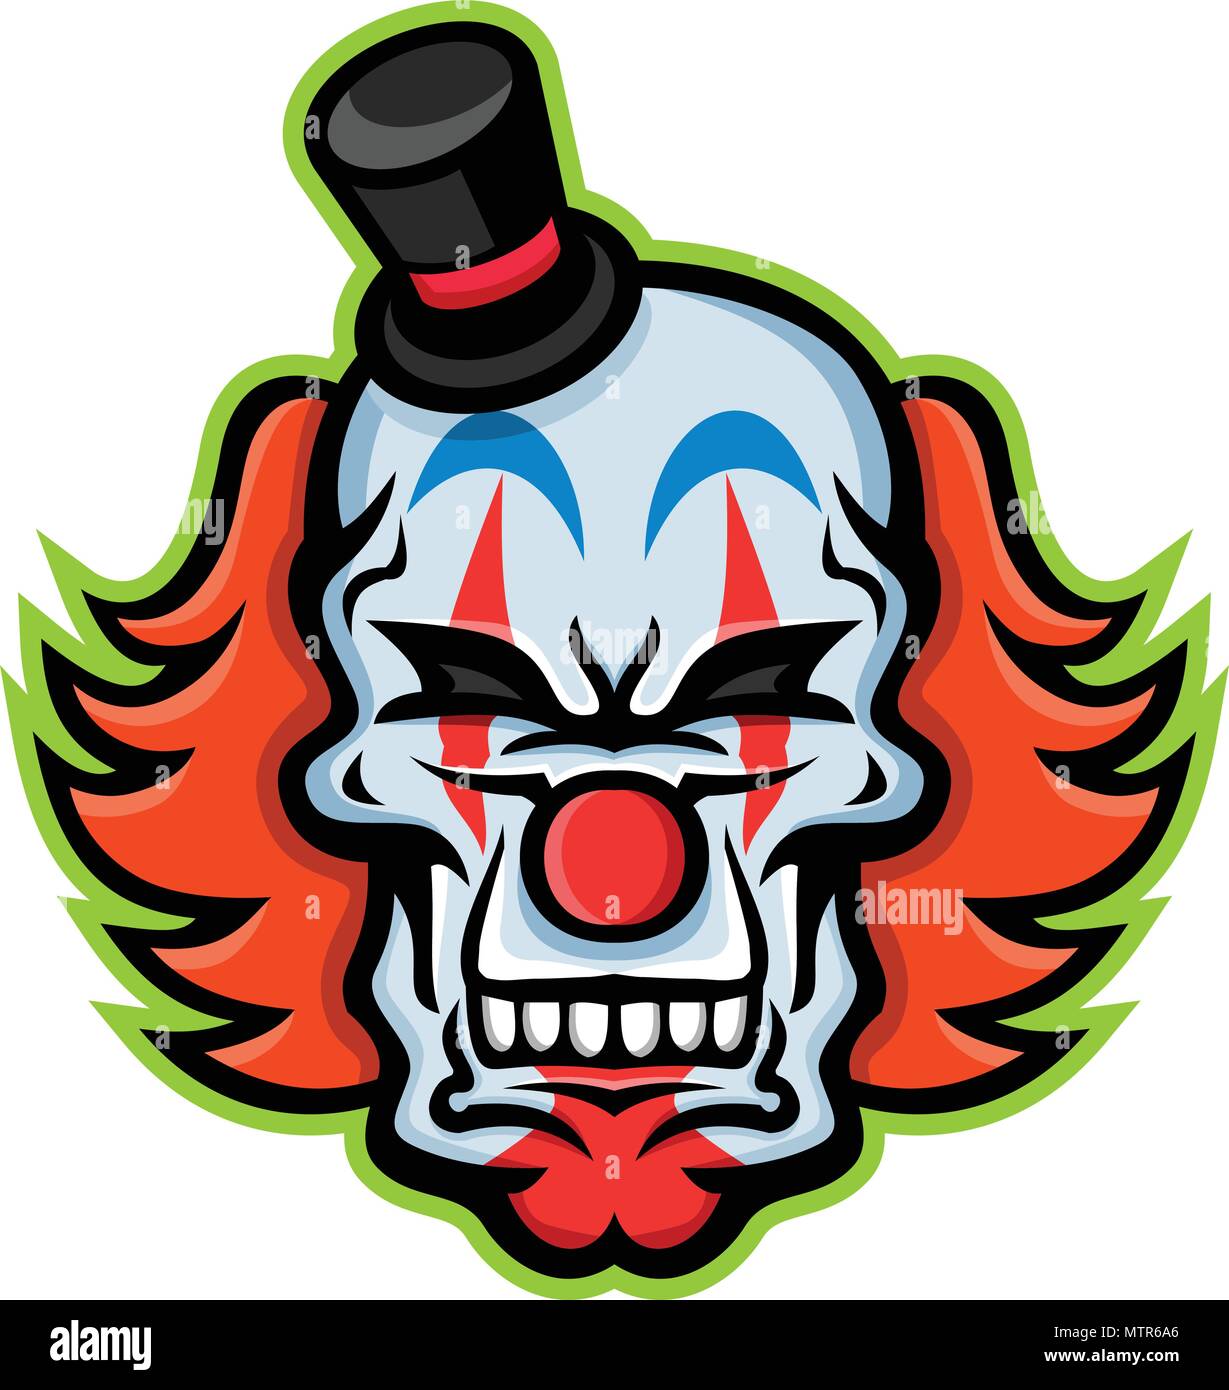 Mascot icon illustration of skull of a white-face clown with red hair wearing a small top hat viewed from front on isolated background in retro style. Stock Vector